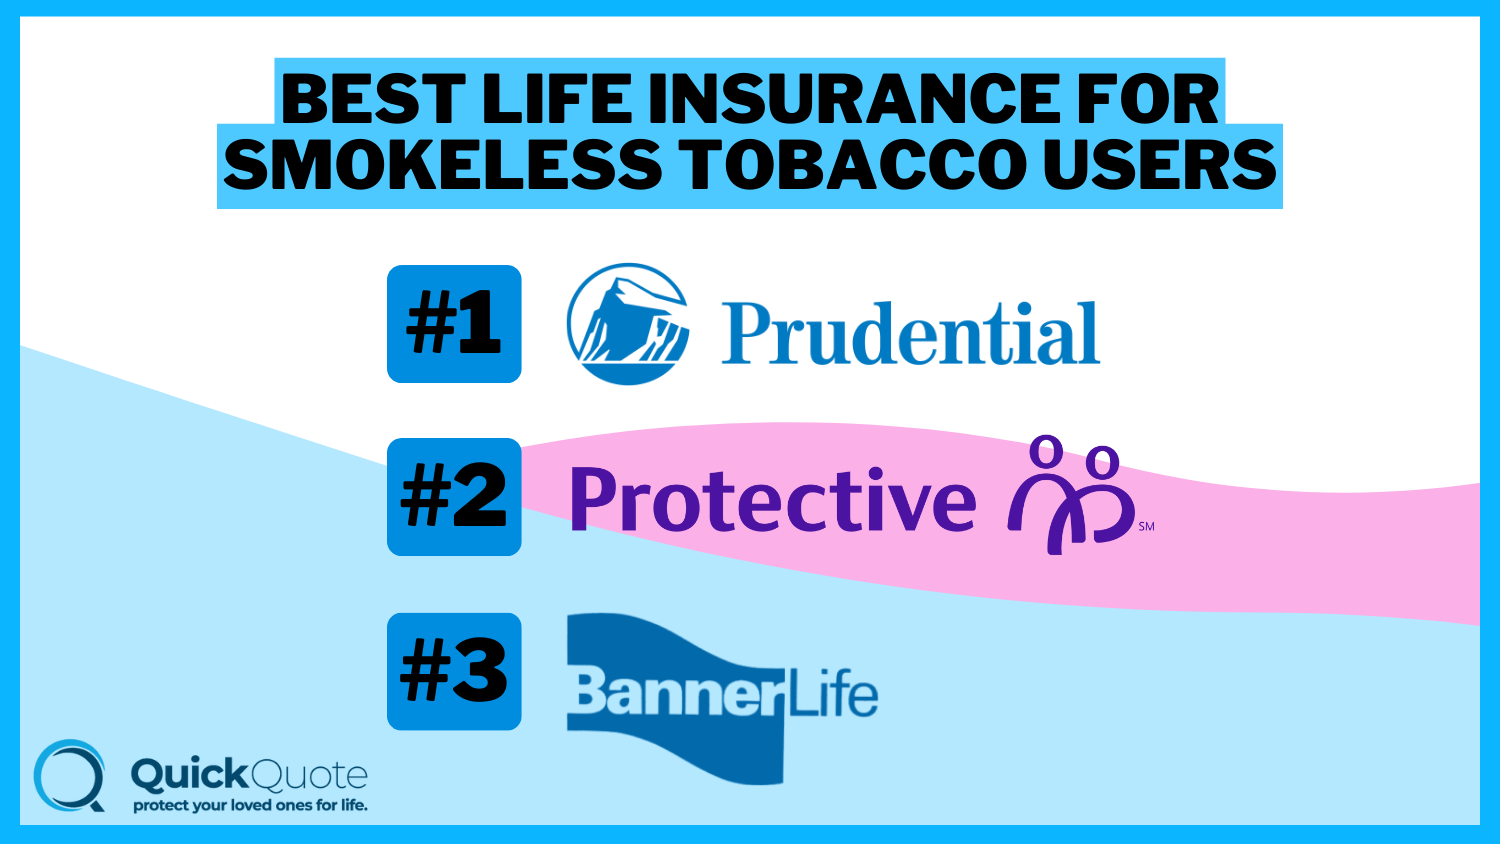 Prudential, Protective Life, and Banner Life: Best Life Insurance for Smokeless Tobacco Users